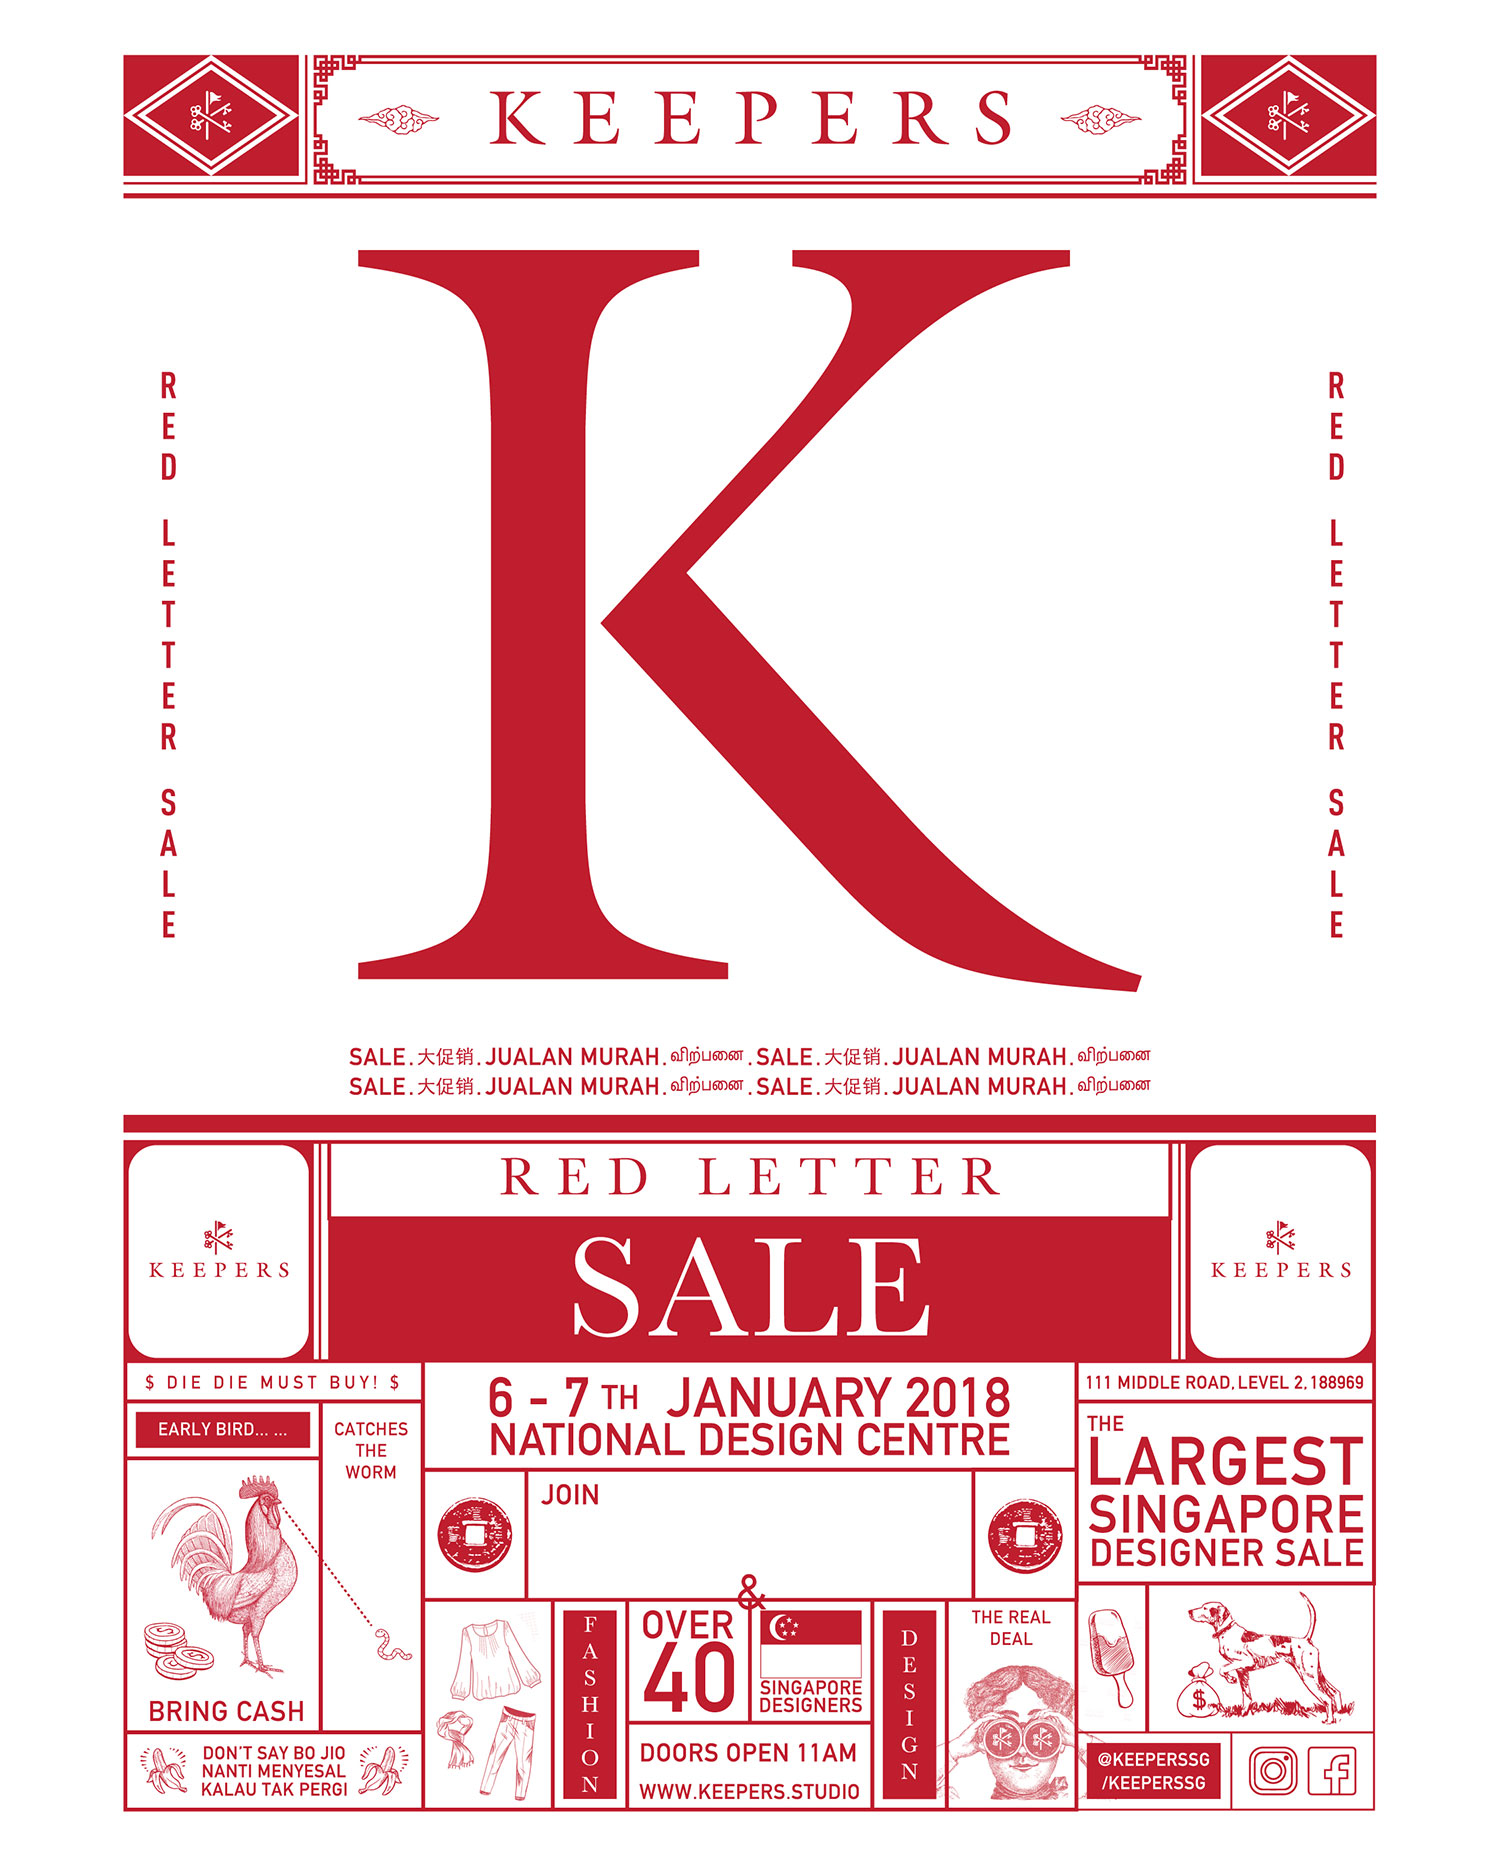 The KEEPERS Red Letter Sale